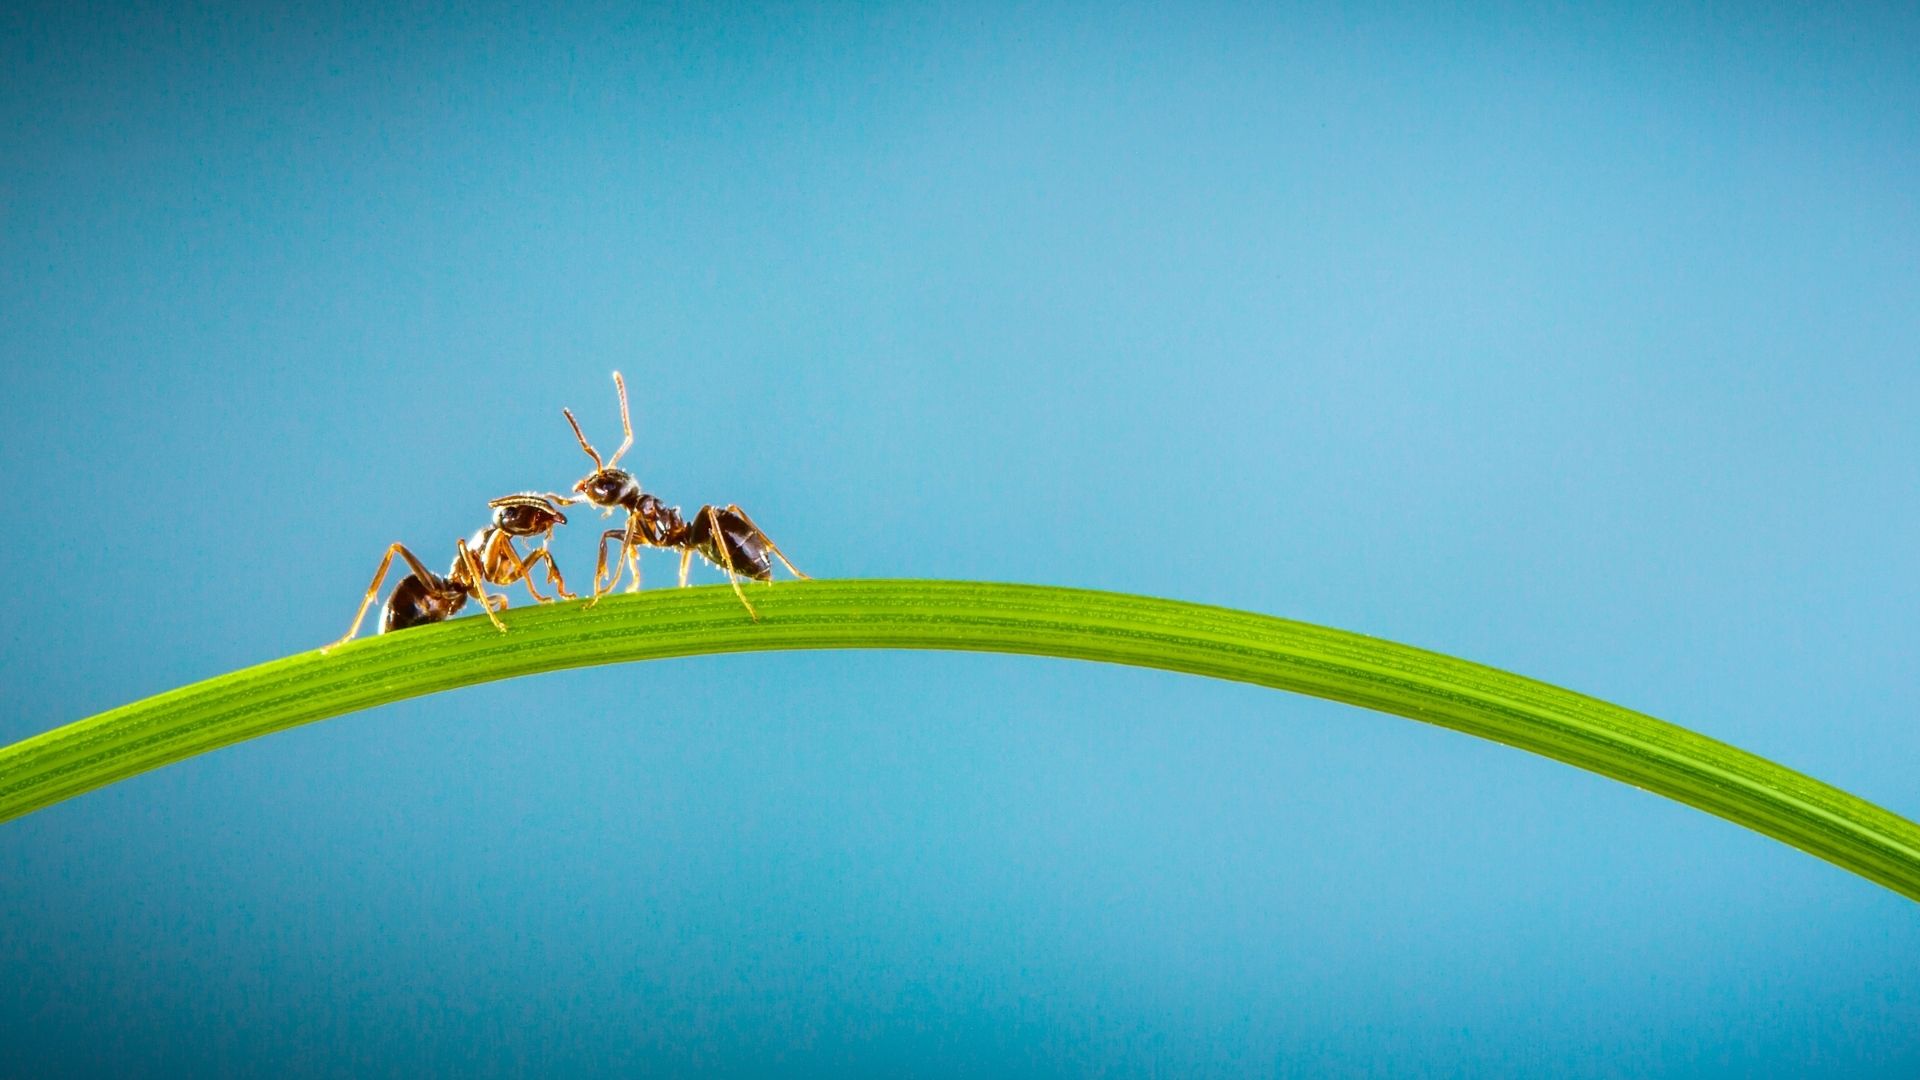 Decorative image with two ants on a grass leaf.